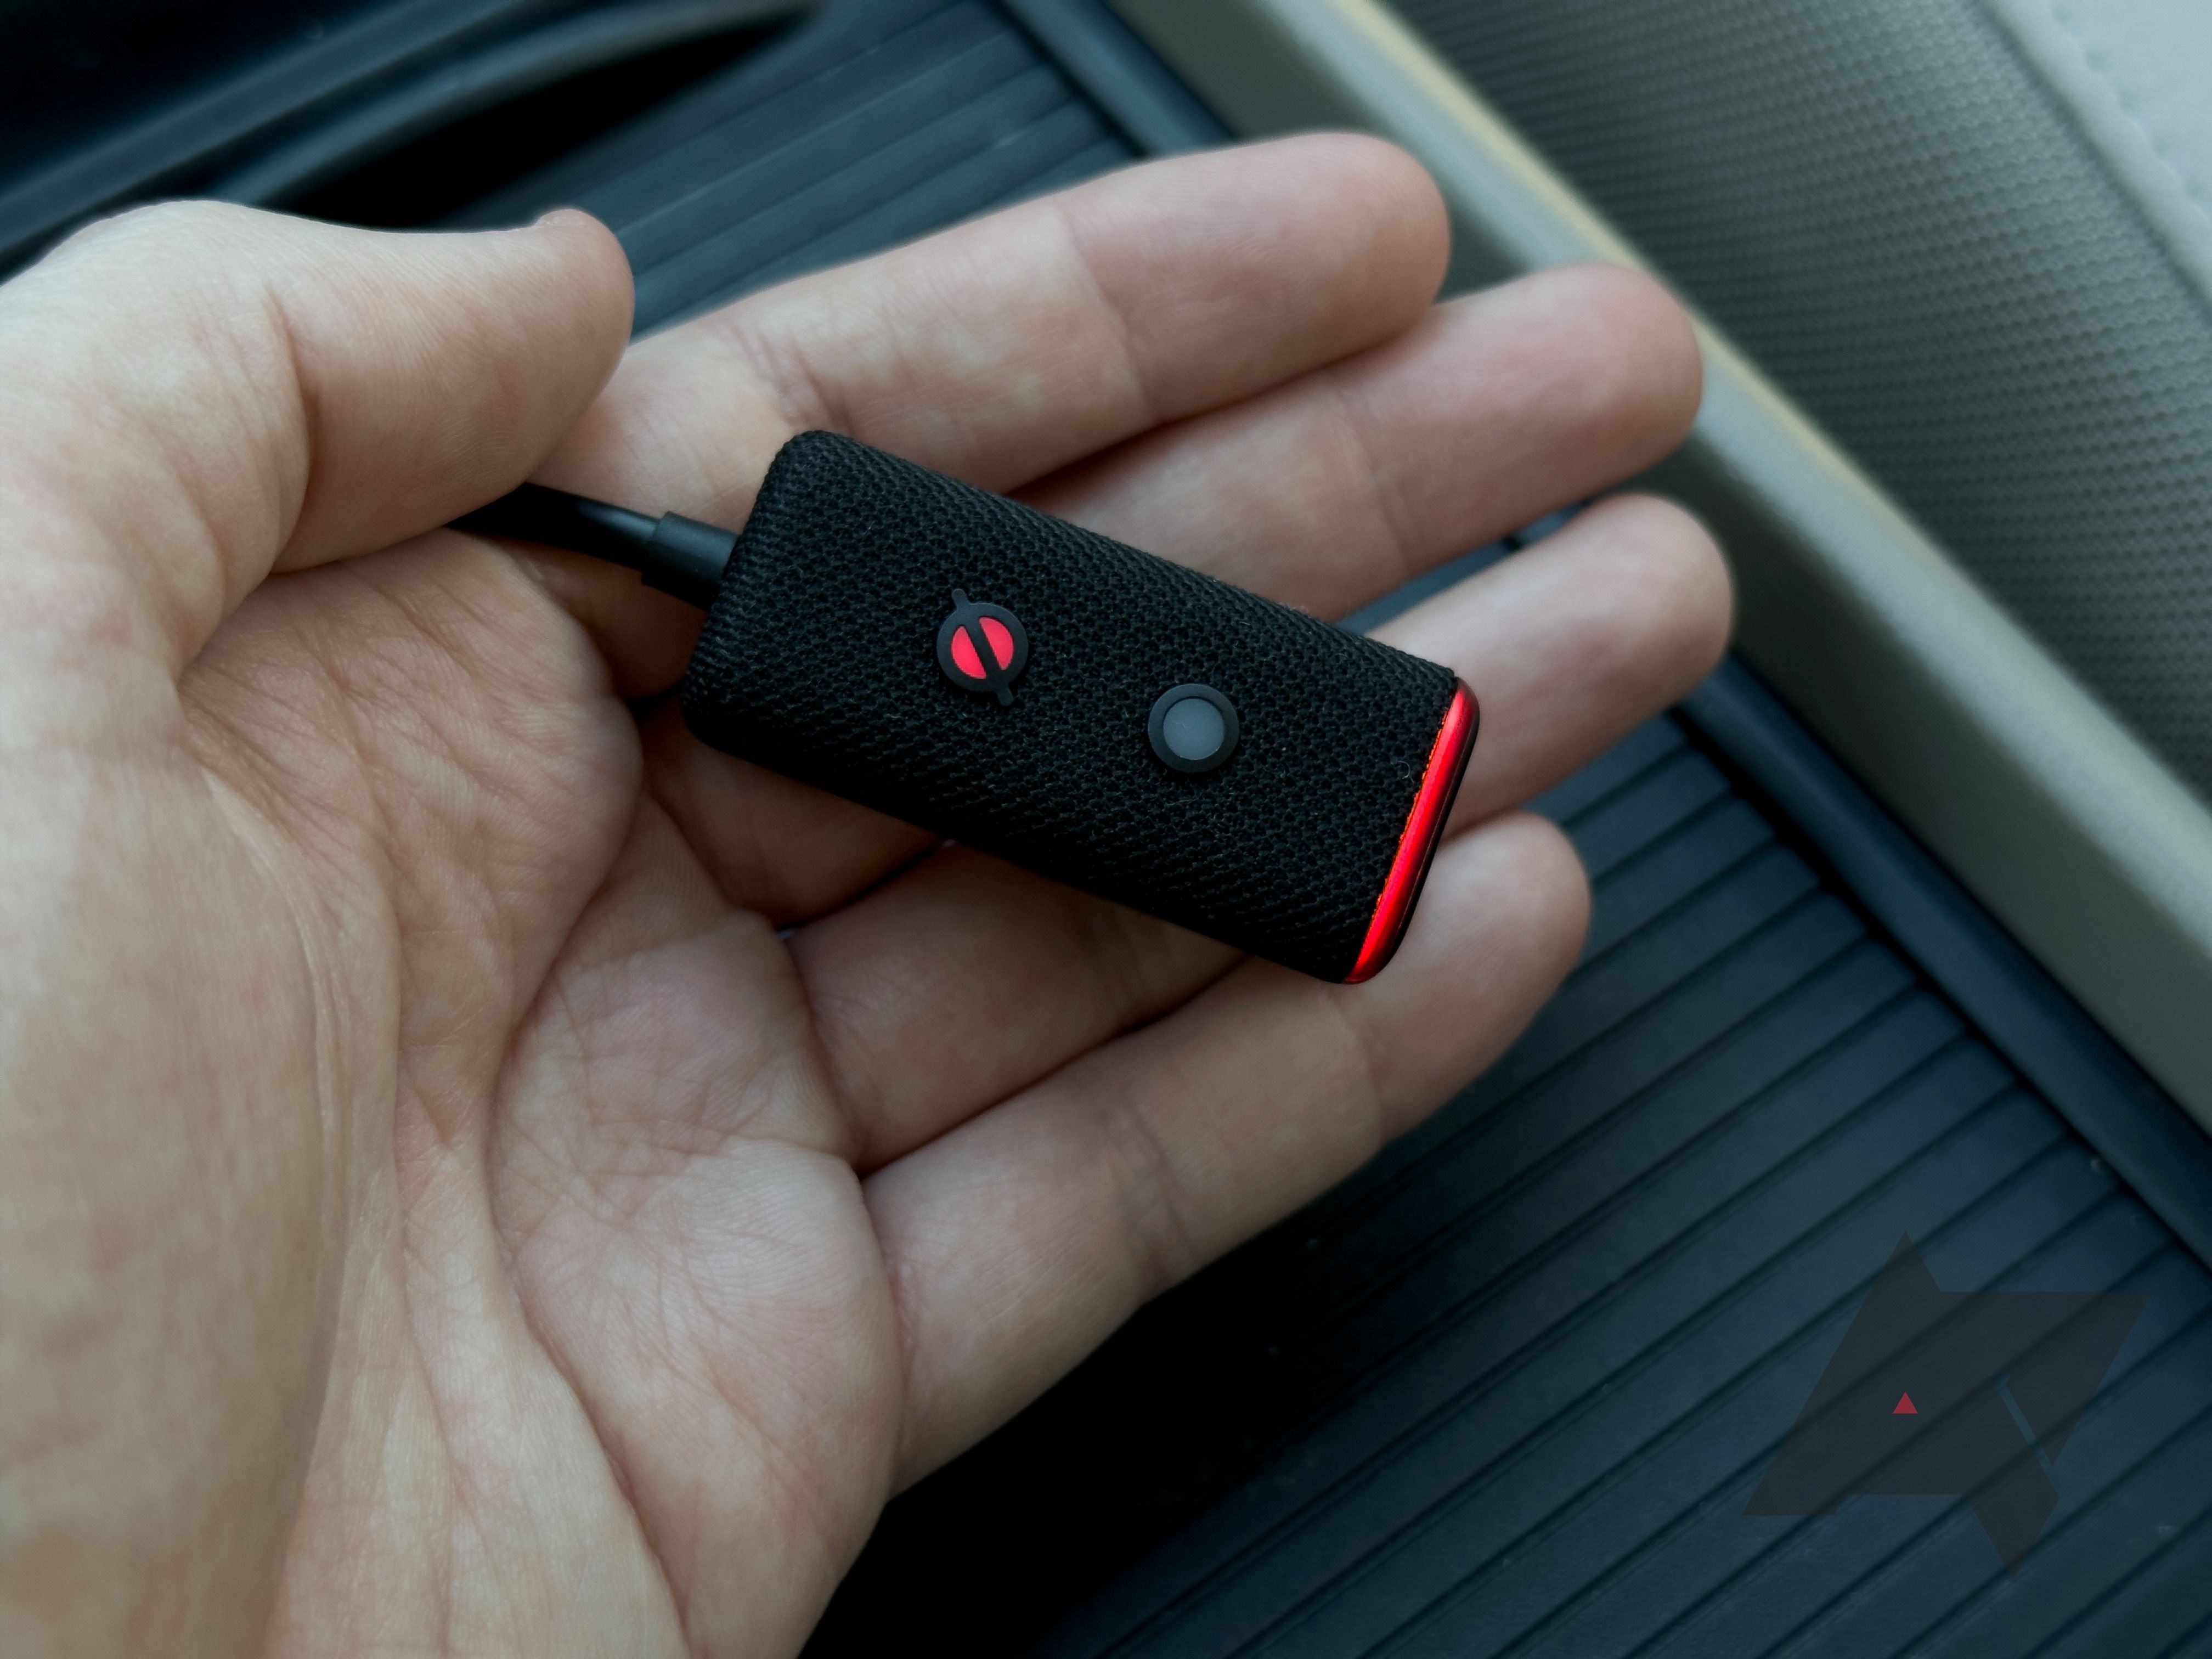 Echo Auto (2nd Gen) review: Alexa for your car just got a big